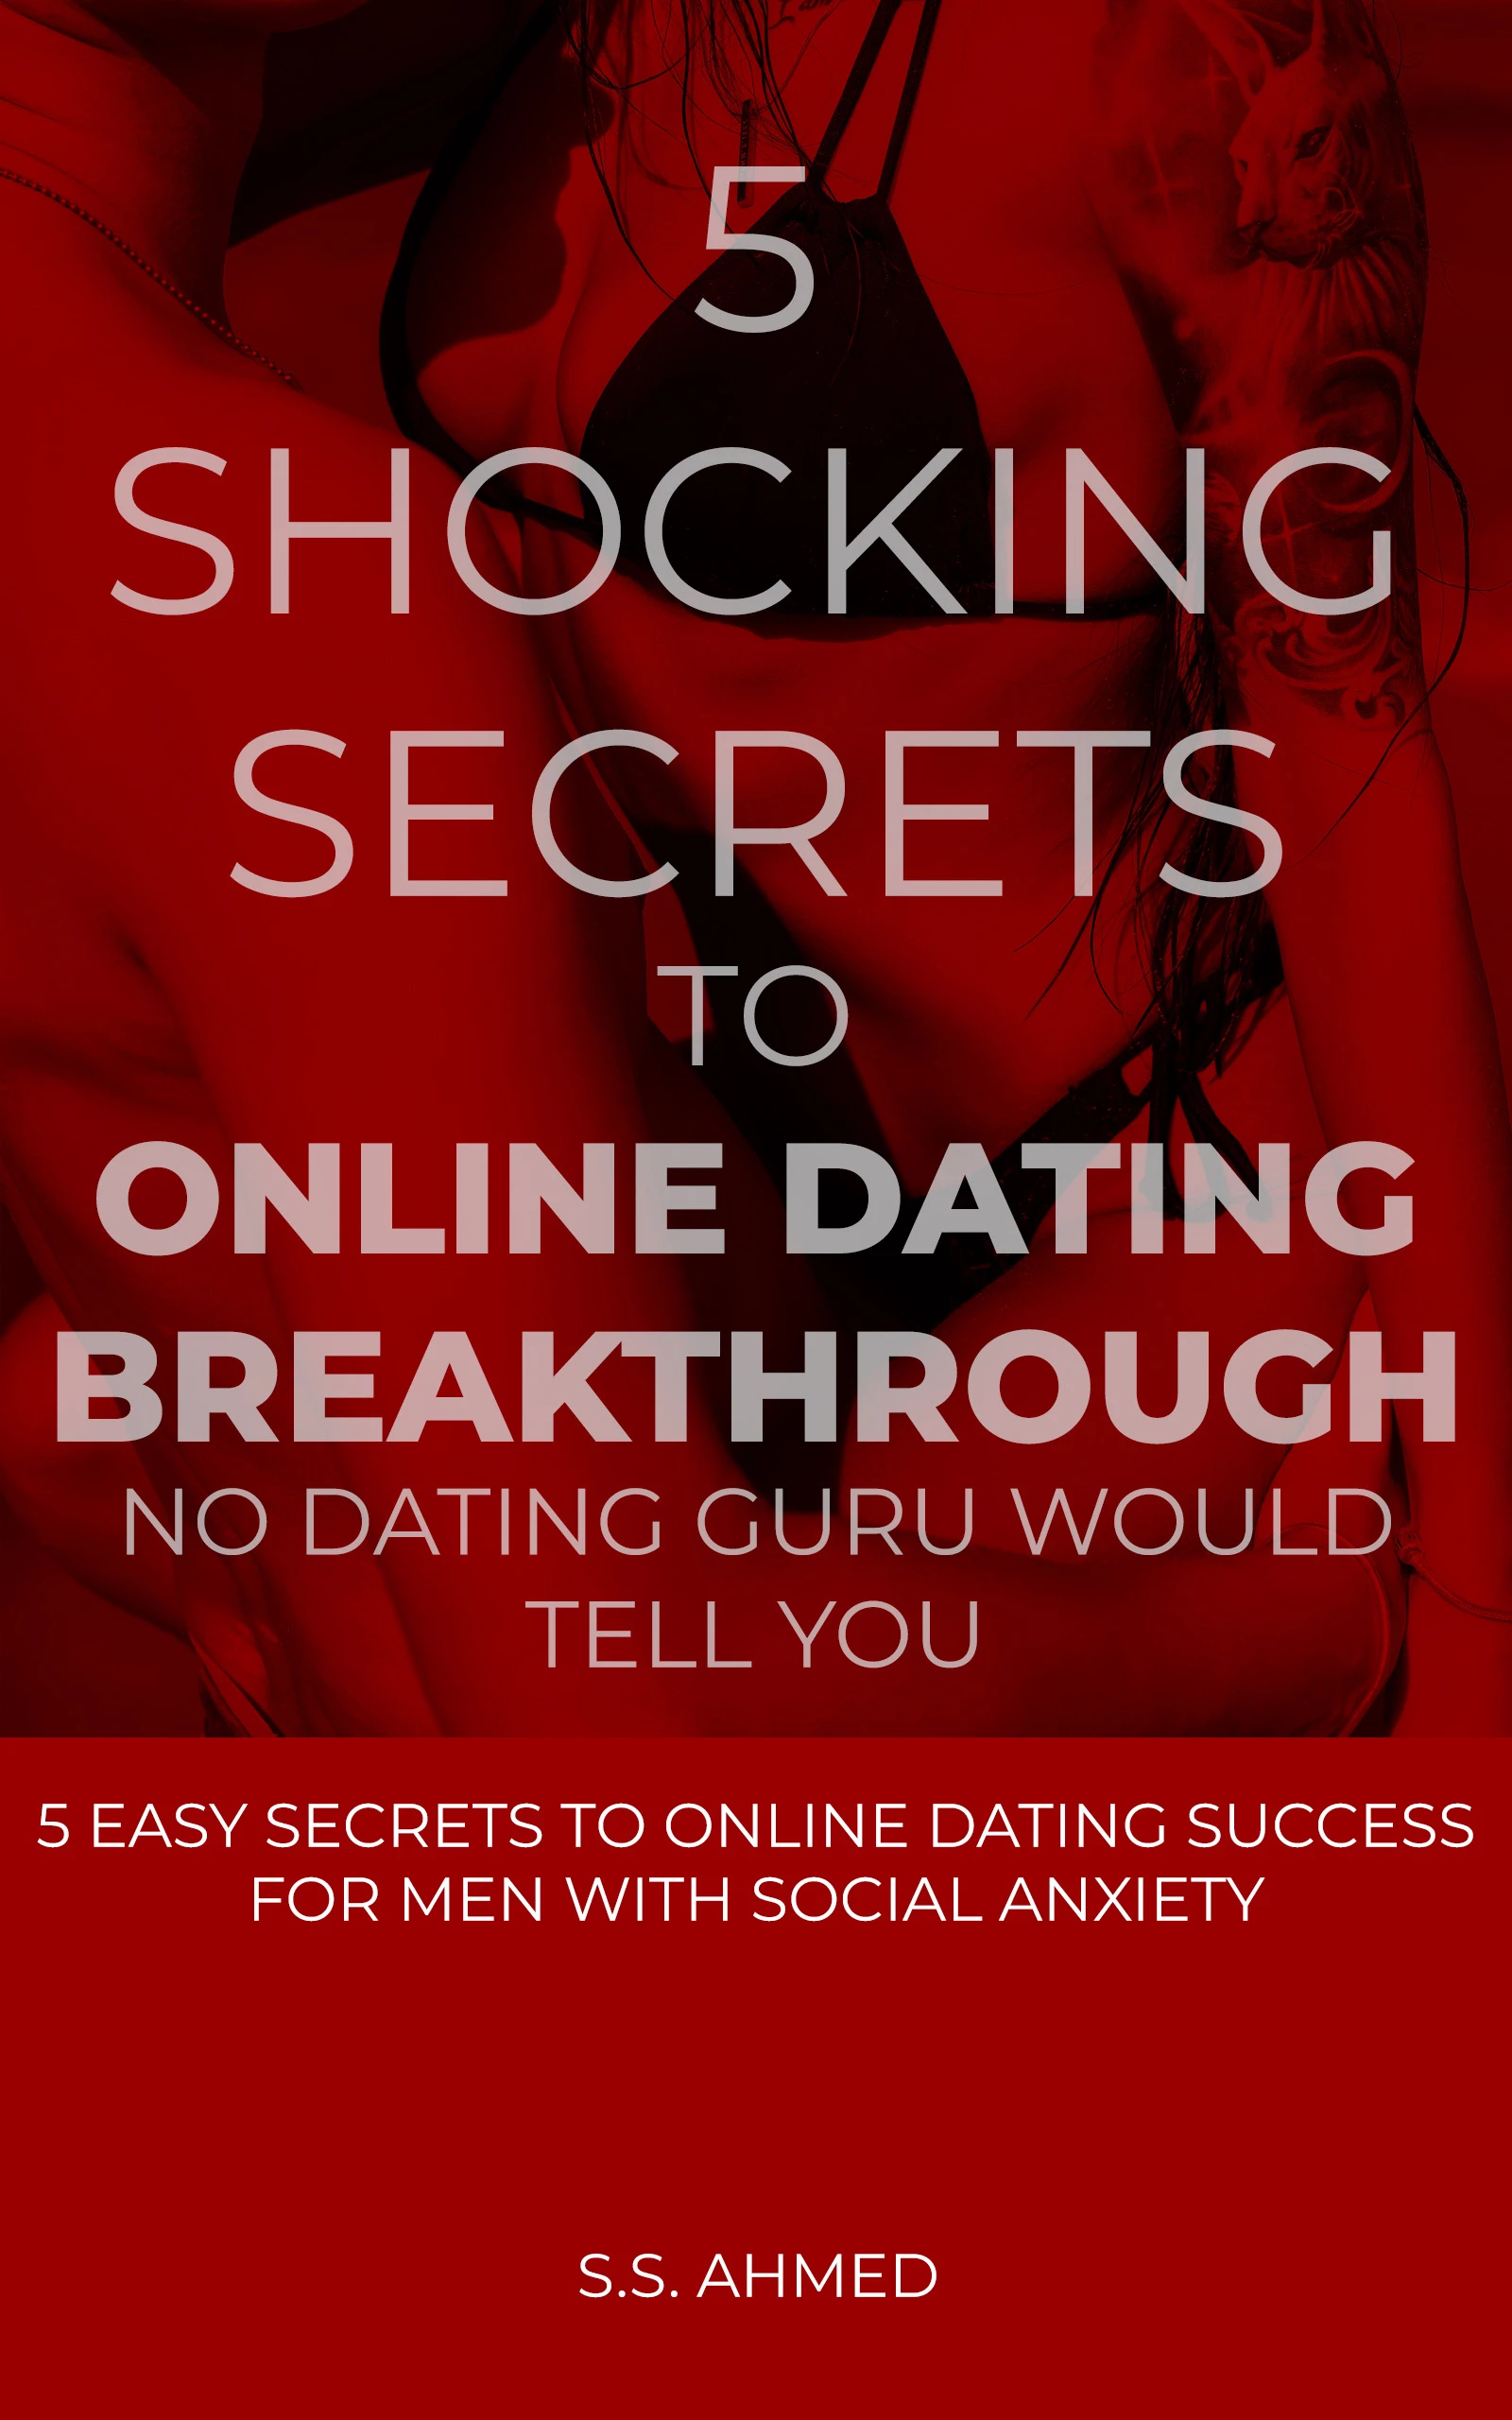 5 SHOCKING SECRETS TO ONLINE DATING BREAKTHROUGH NO DATING GURU WOULD TELL YOU: 5 EASY SECRETS TO ONLINE DATING SUCCESS FOR MEN WITH SOCIAL ANXIETY